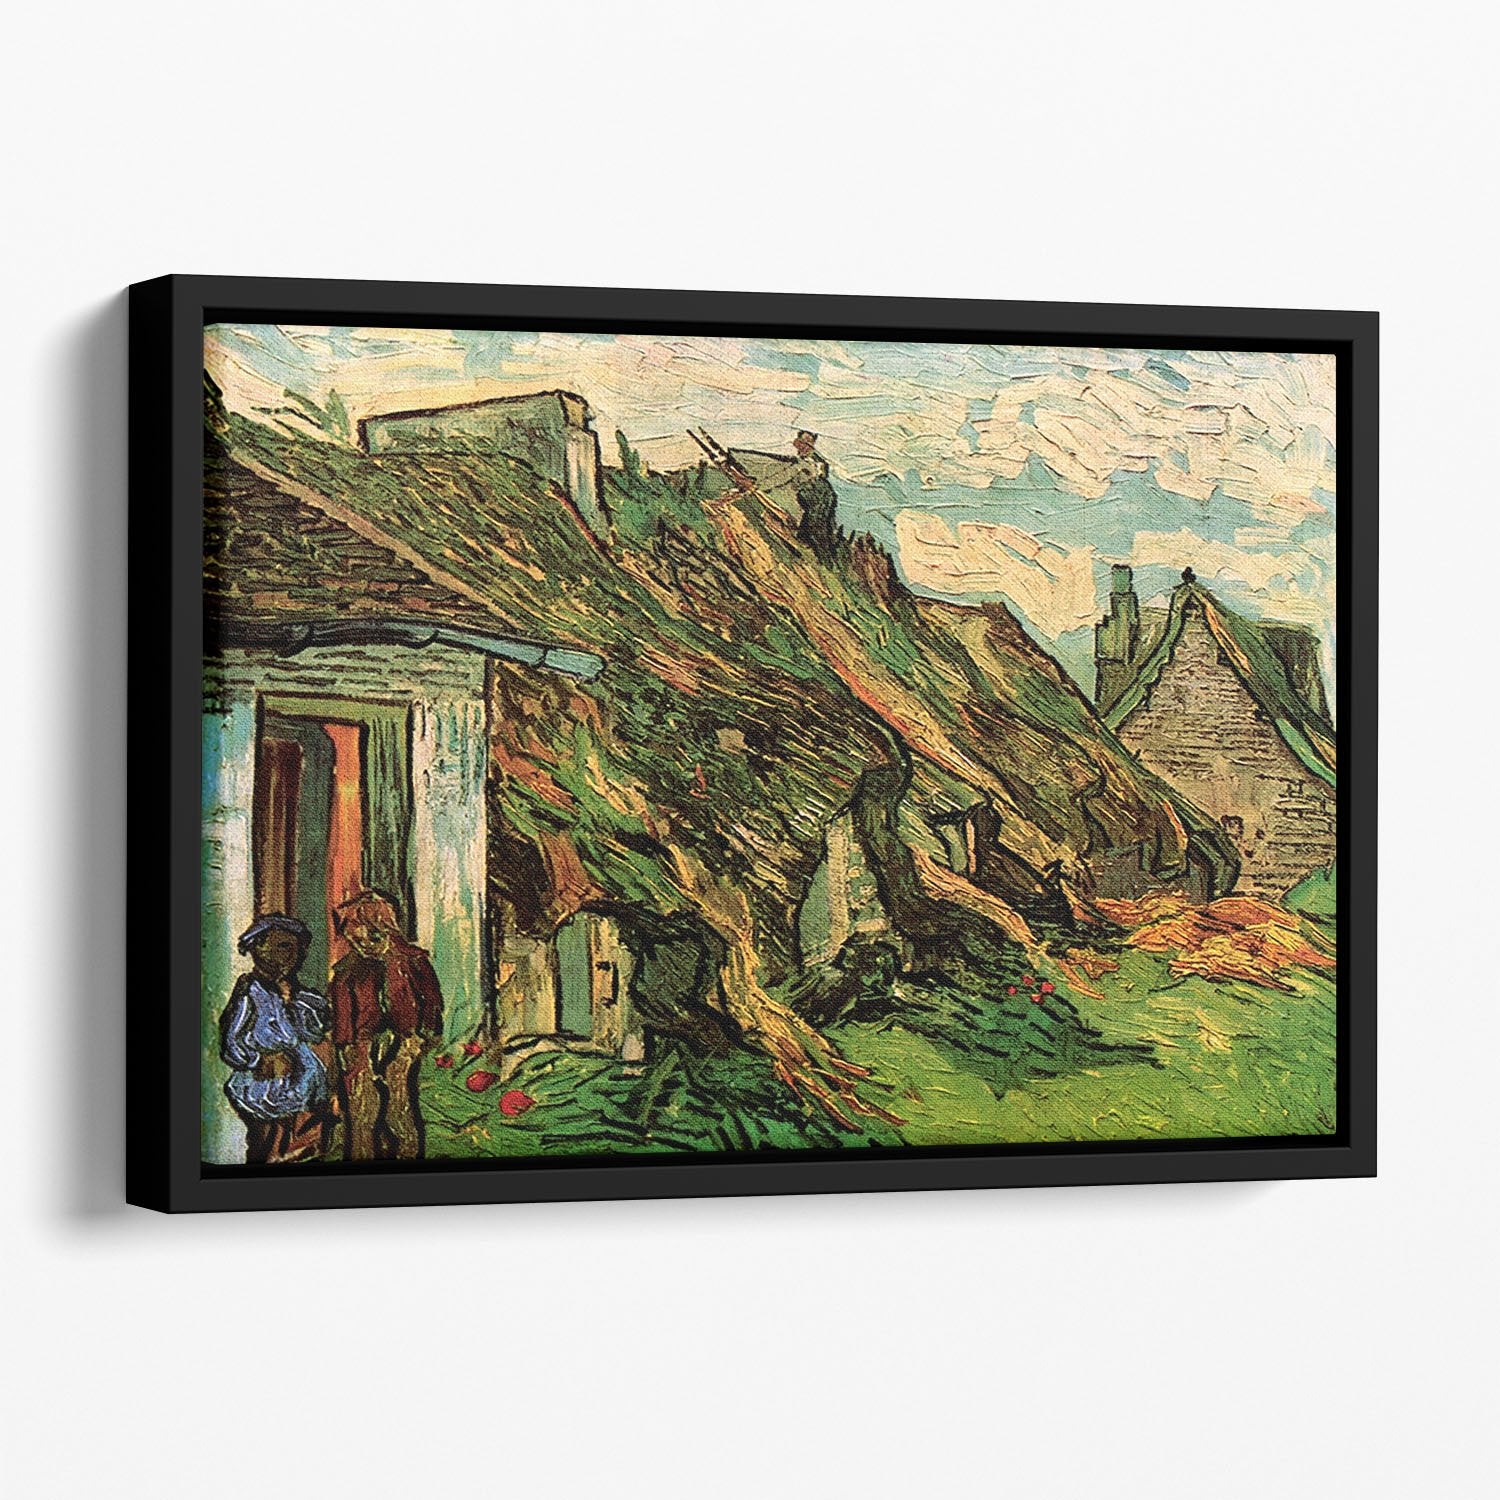 Thatched Sandstone Cottages in Chaponval by Van Gogh Floating Framed Canvas